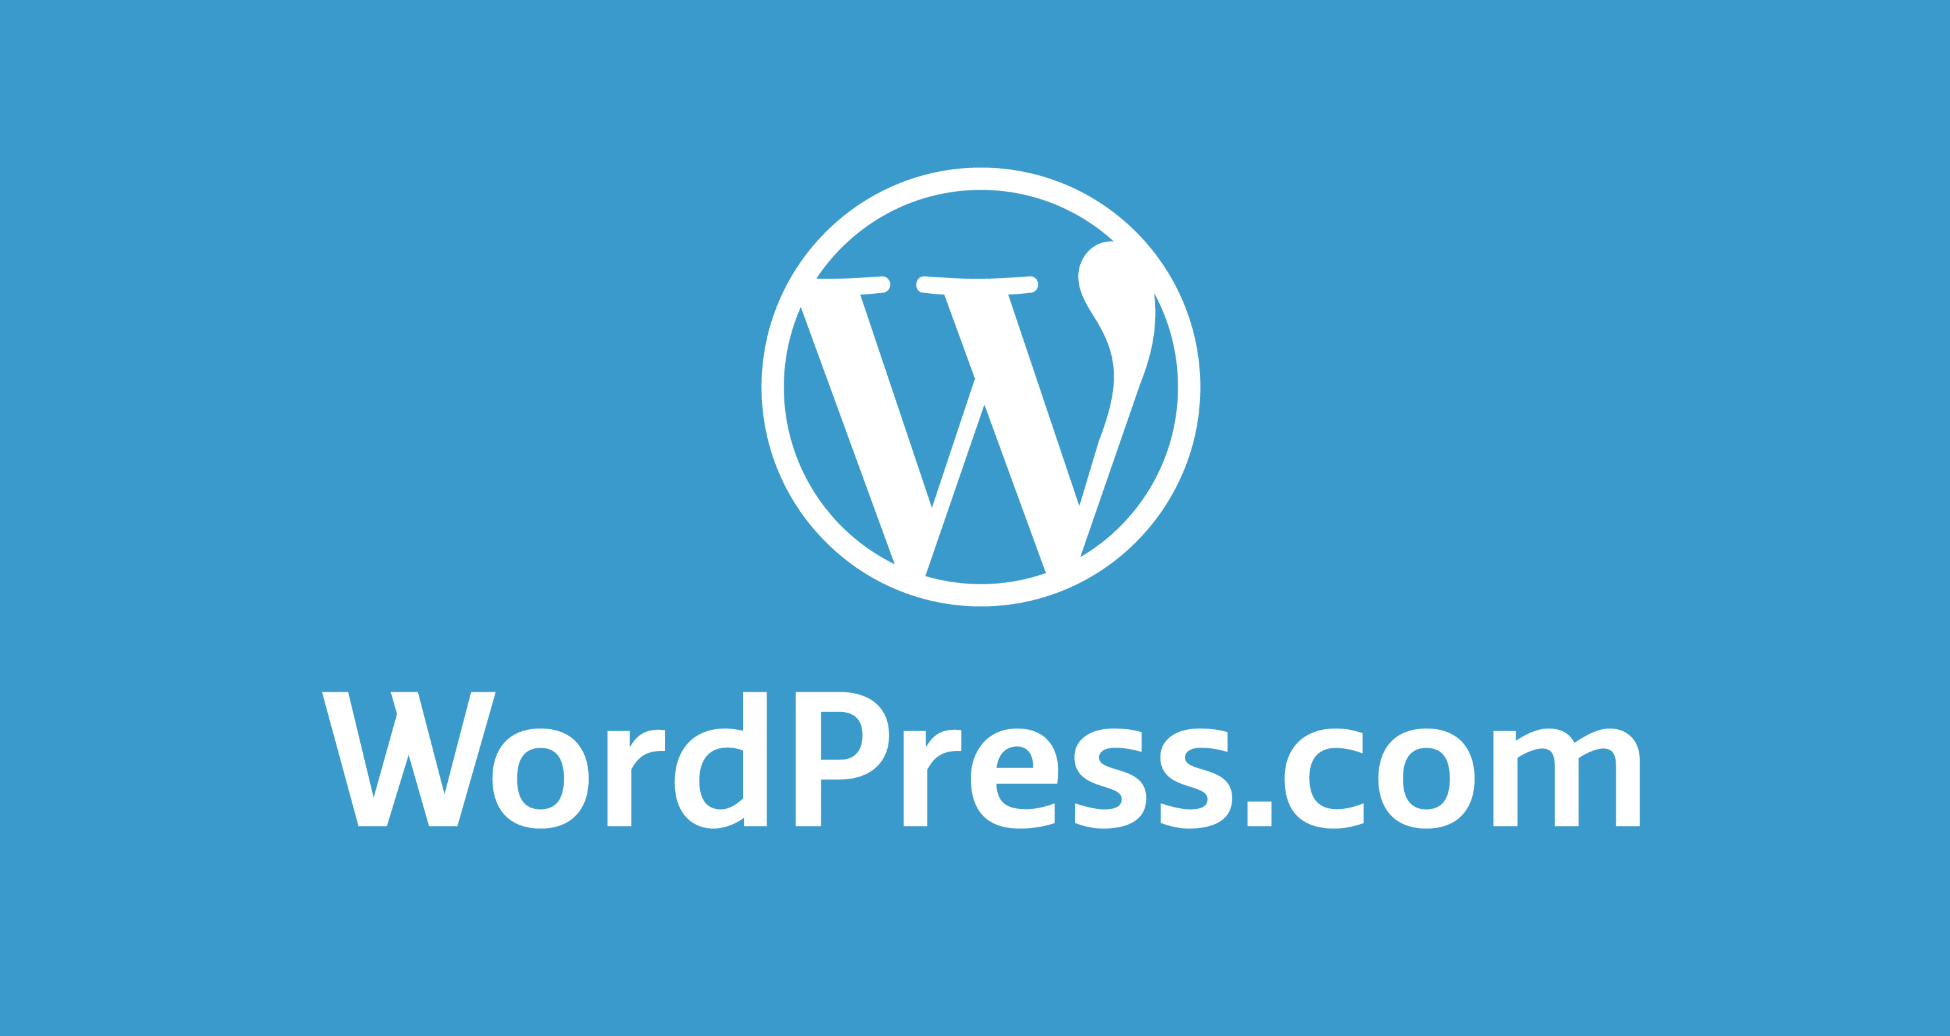 WordPress.com Increases Traffic and Storage Limits on New Plans After Overwhelmingly Negative Feedback on Initial Rollout